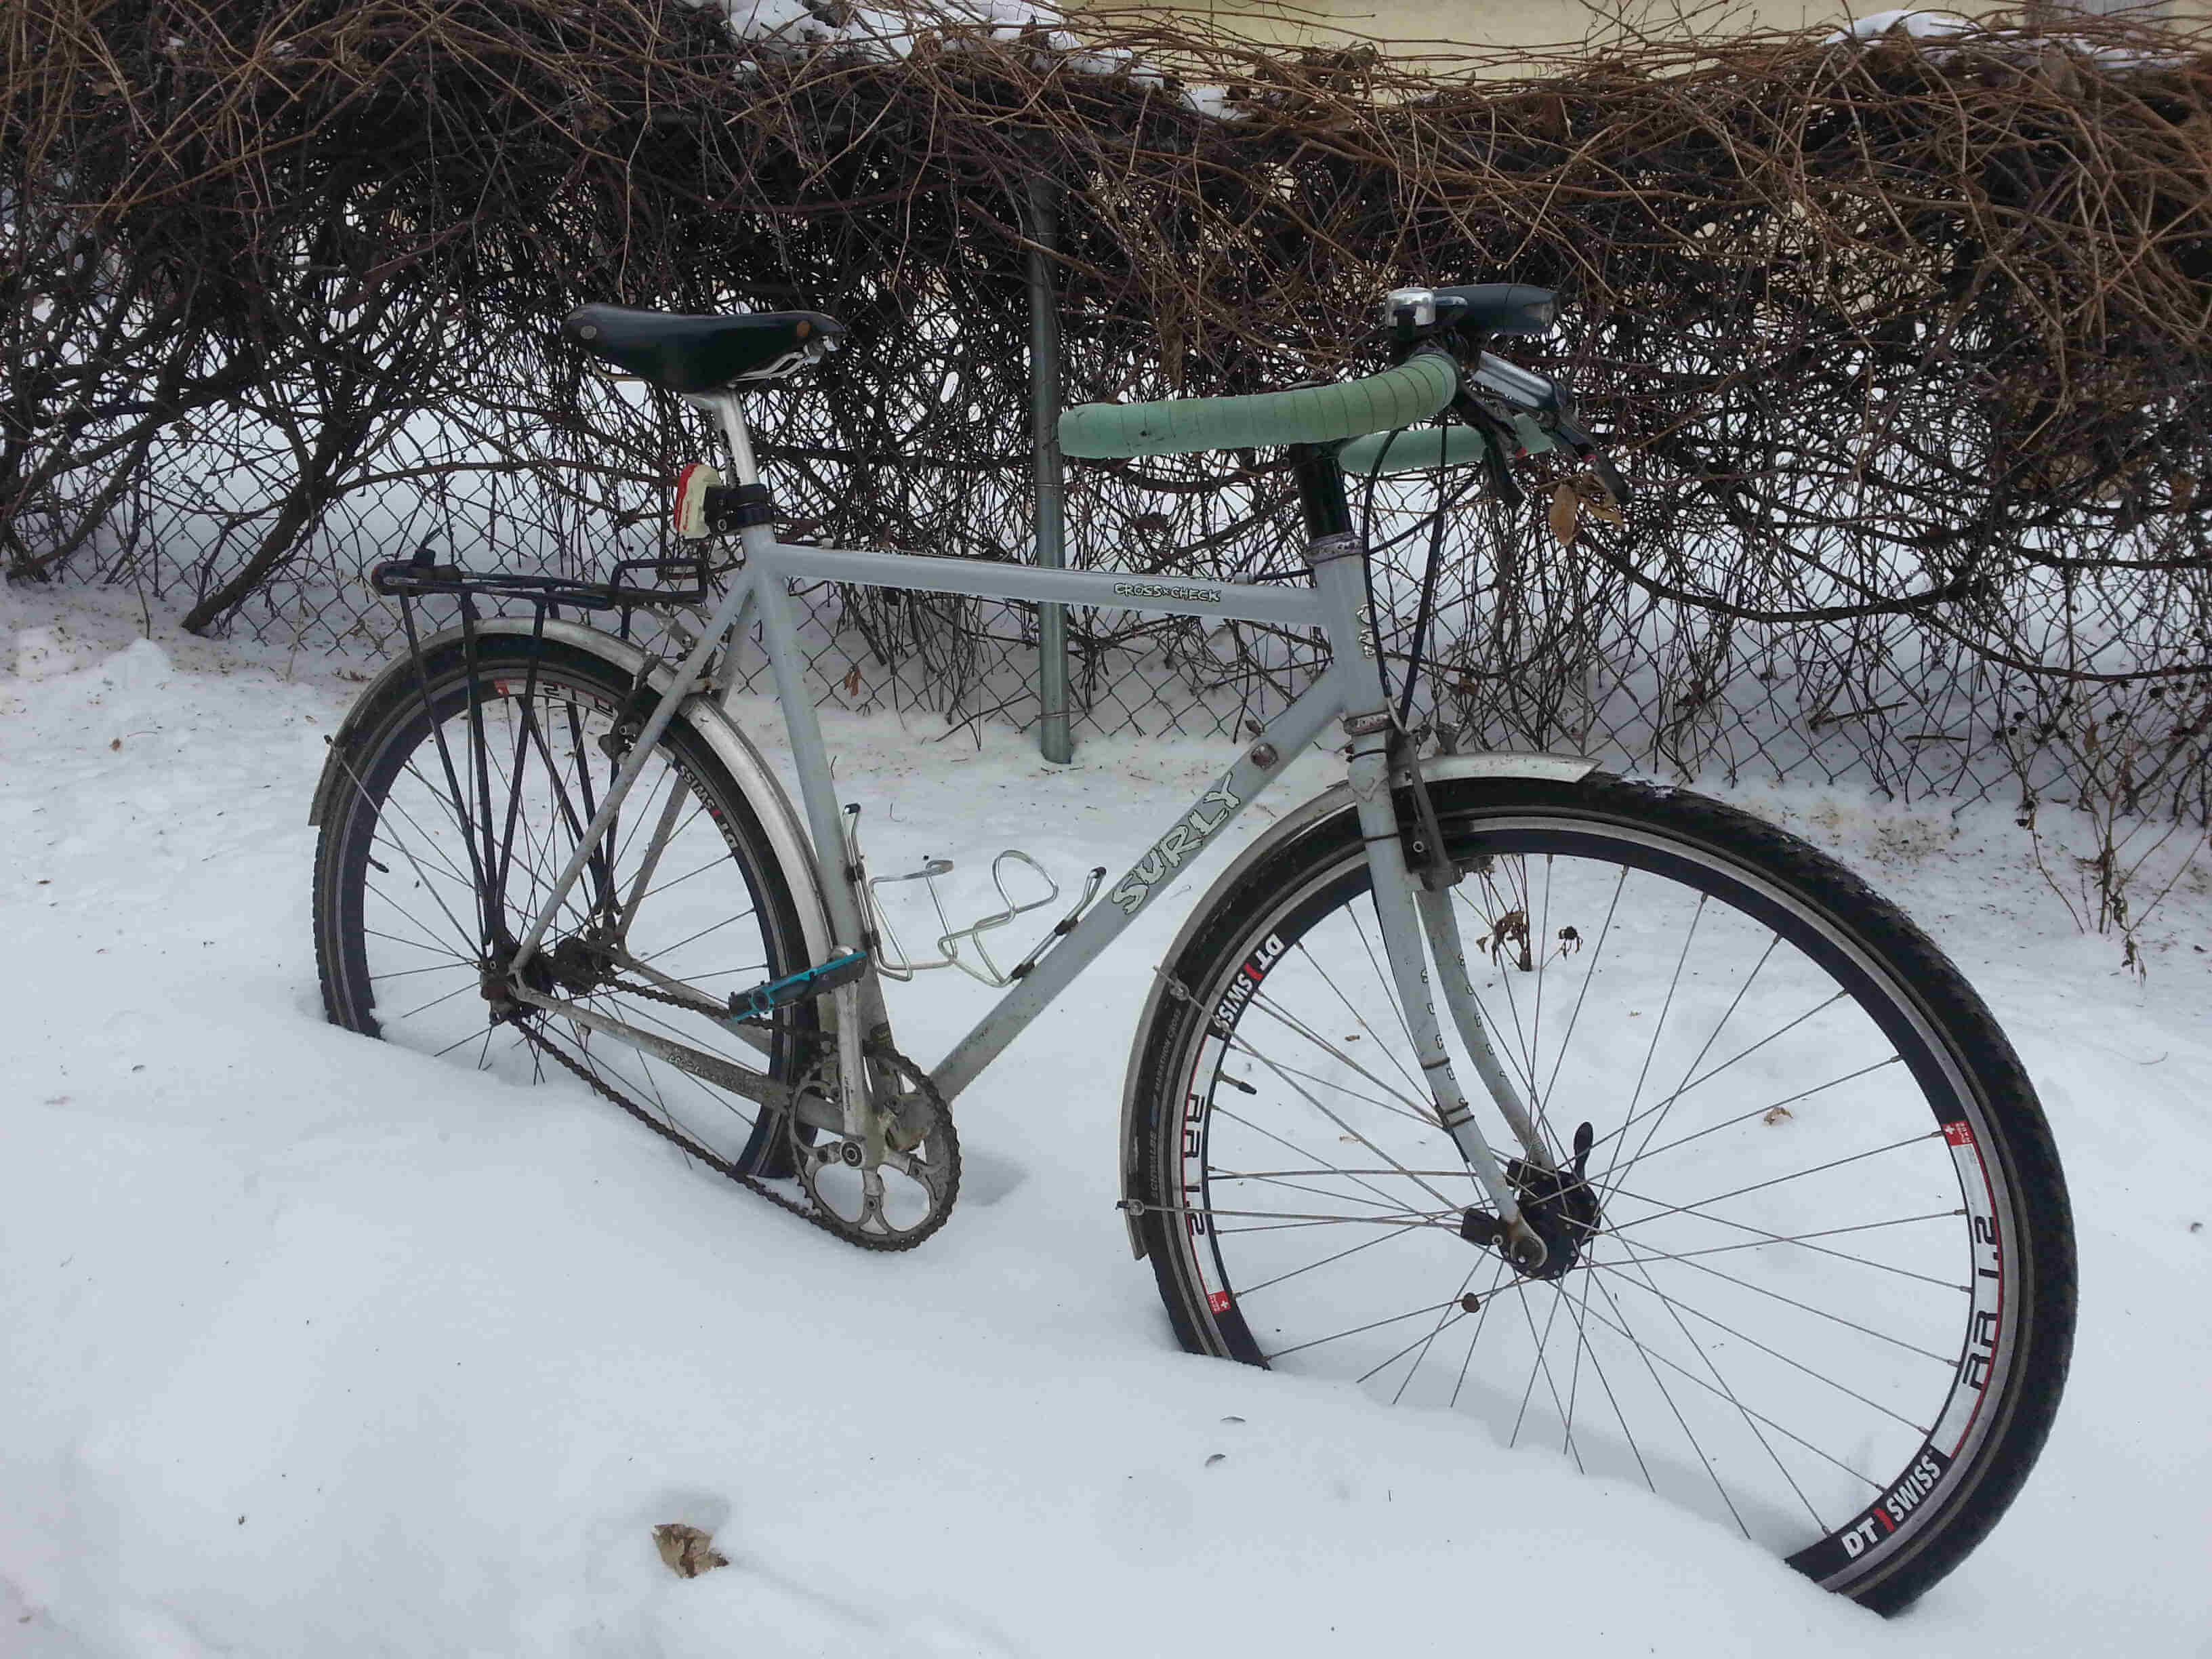 Right side view of a light blue Surly Cross Check bike in deep snow, next to a chain link fence with vines on it